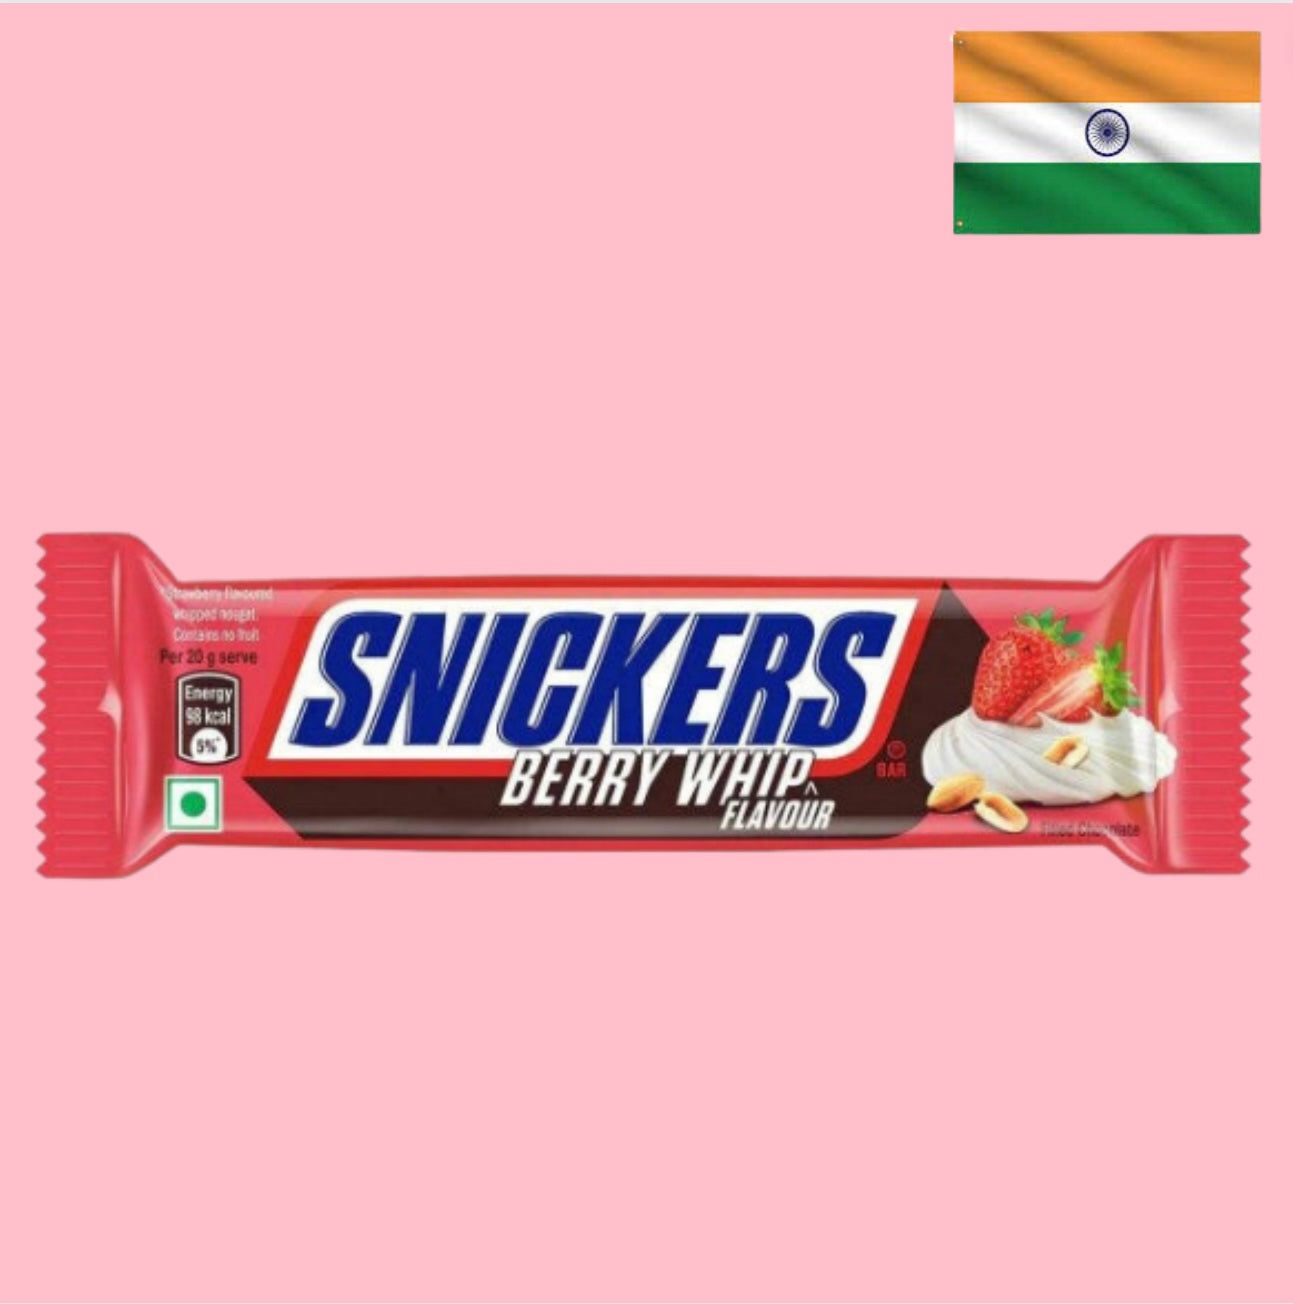 Indian Snickers Berry Whip 22g